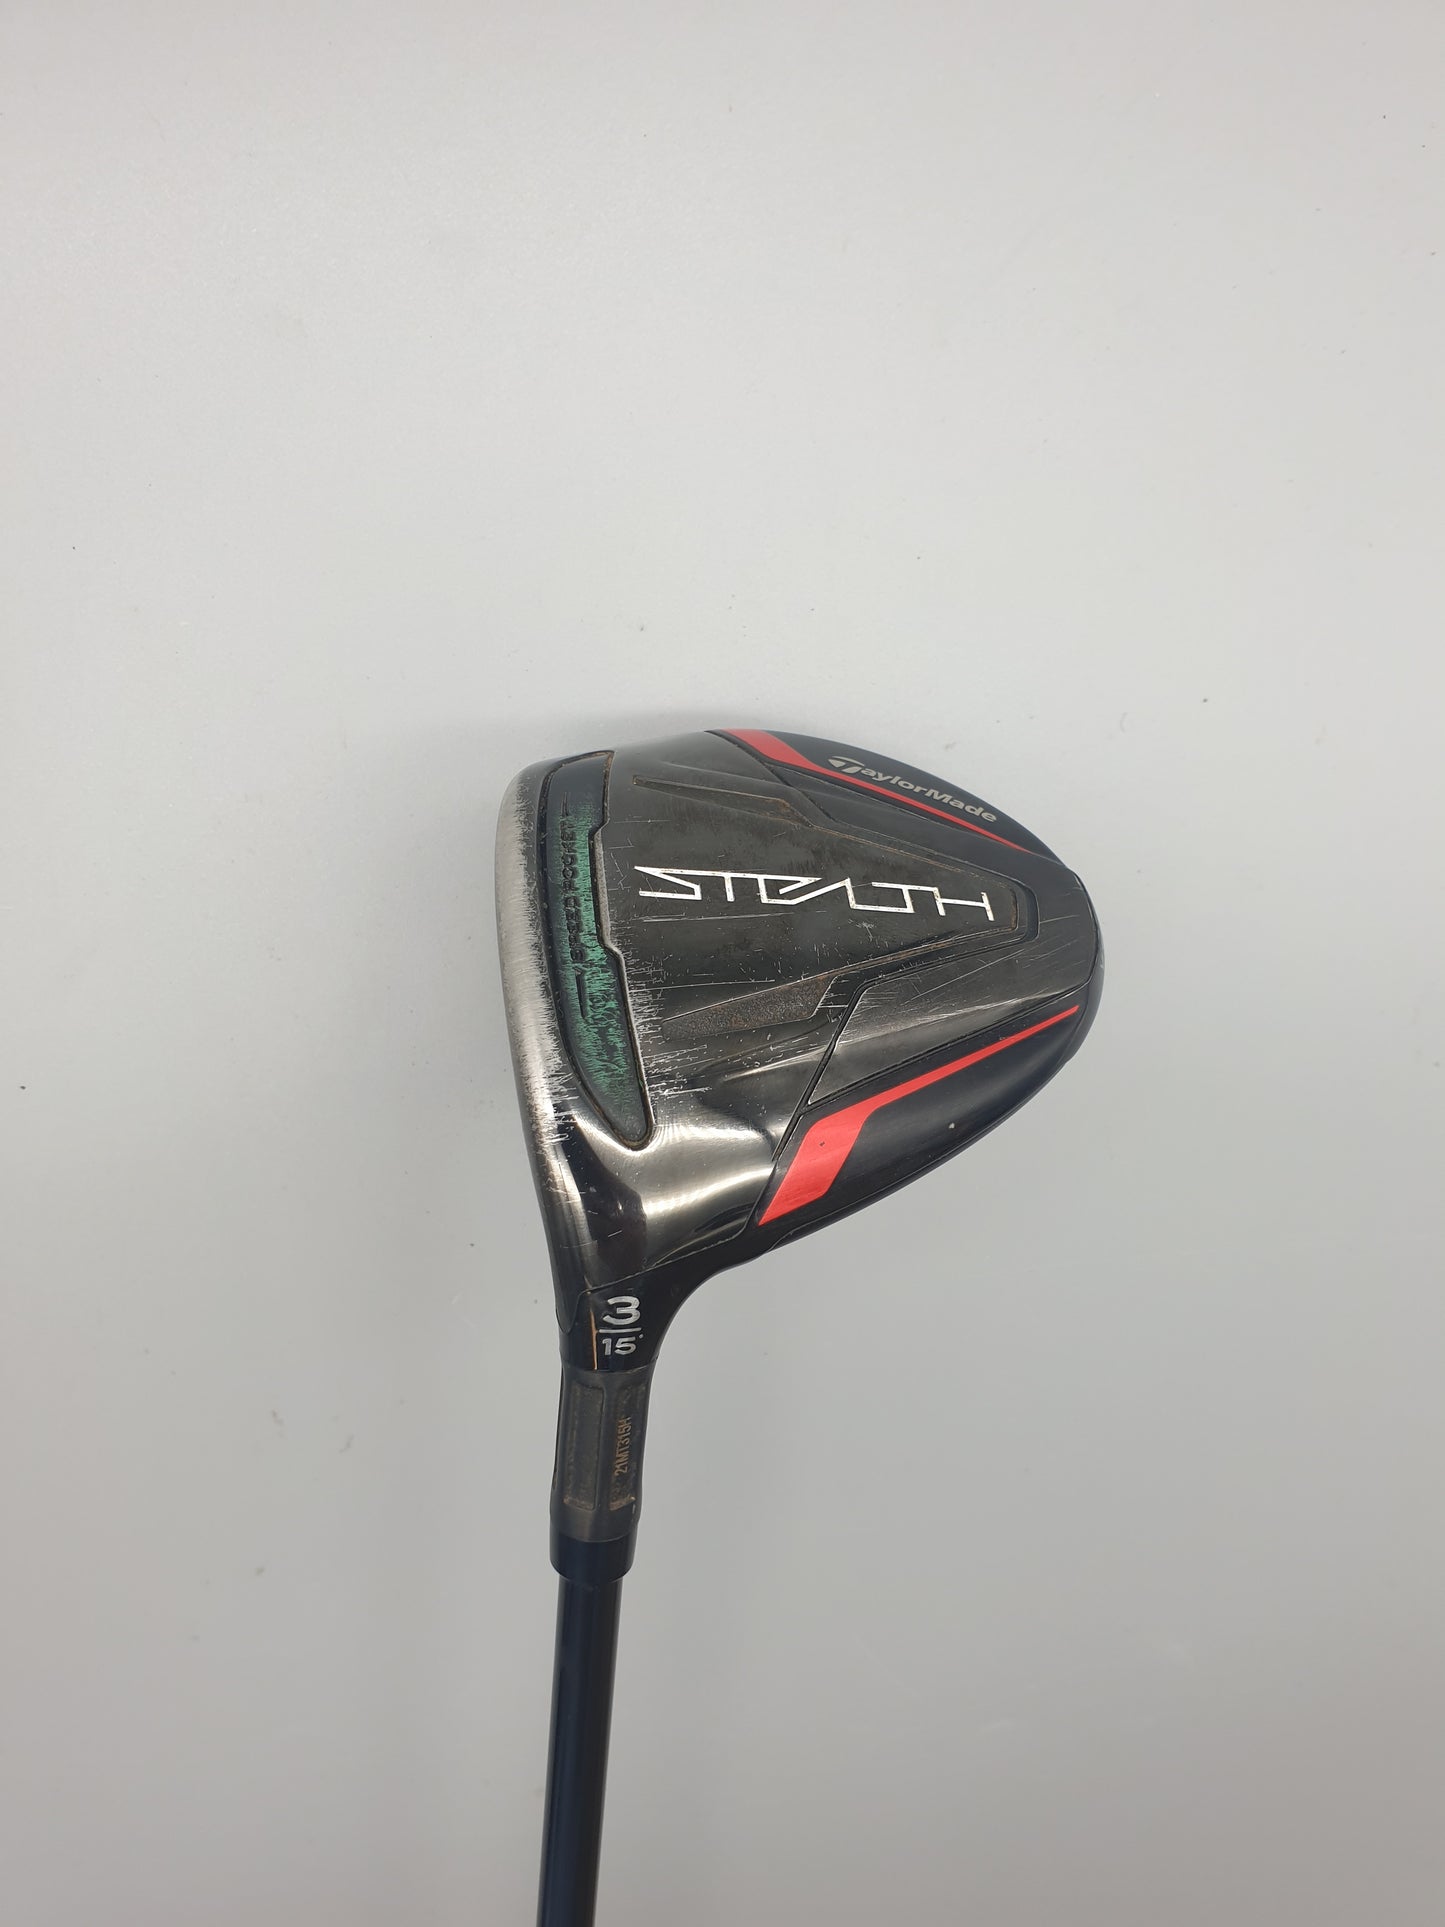 Taylormade Stealth 3FW Ventus 50G Regular Left Hand - Used